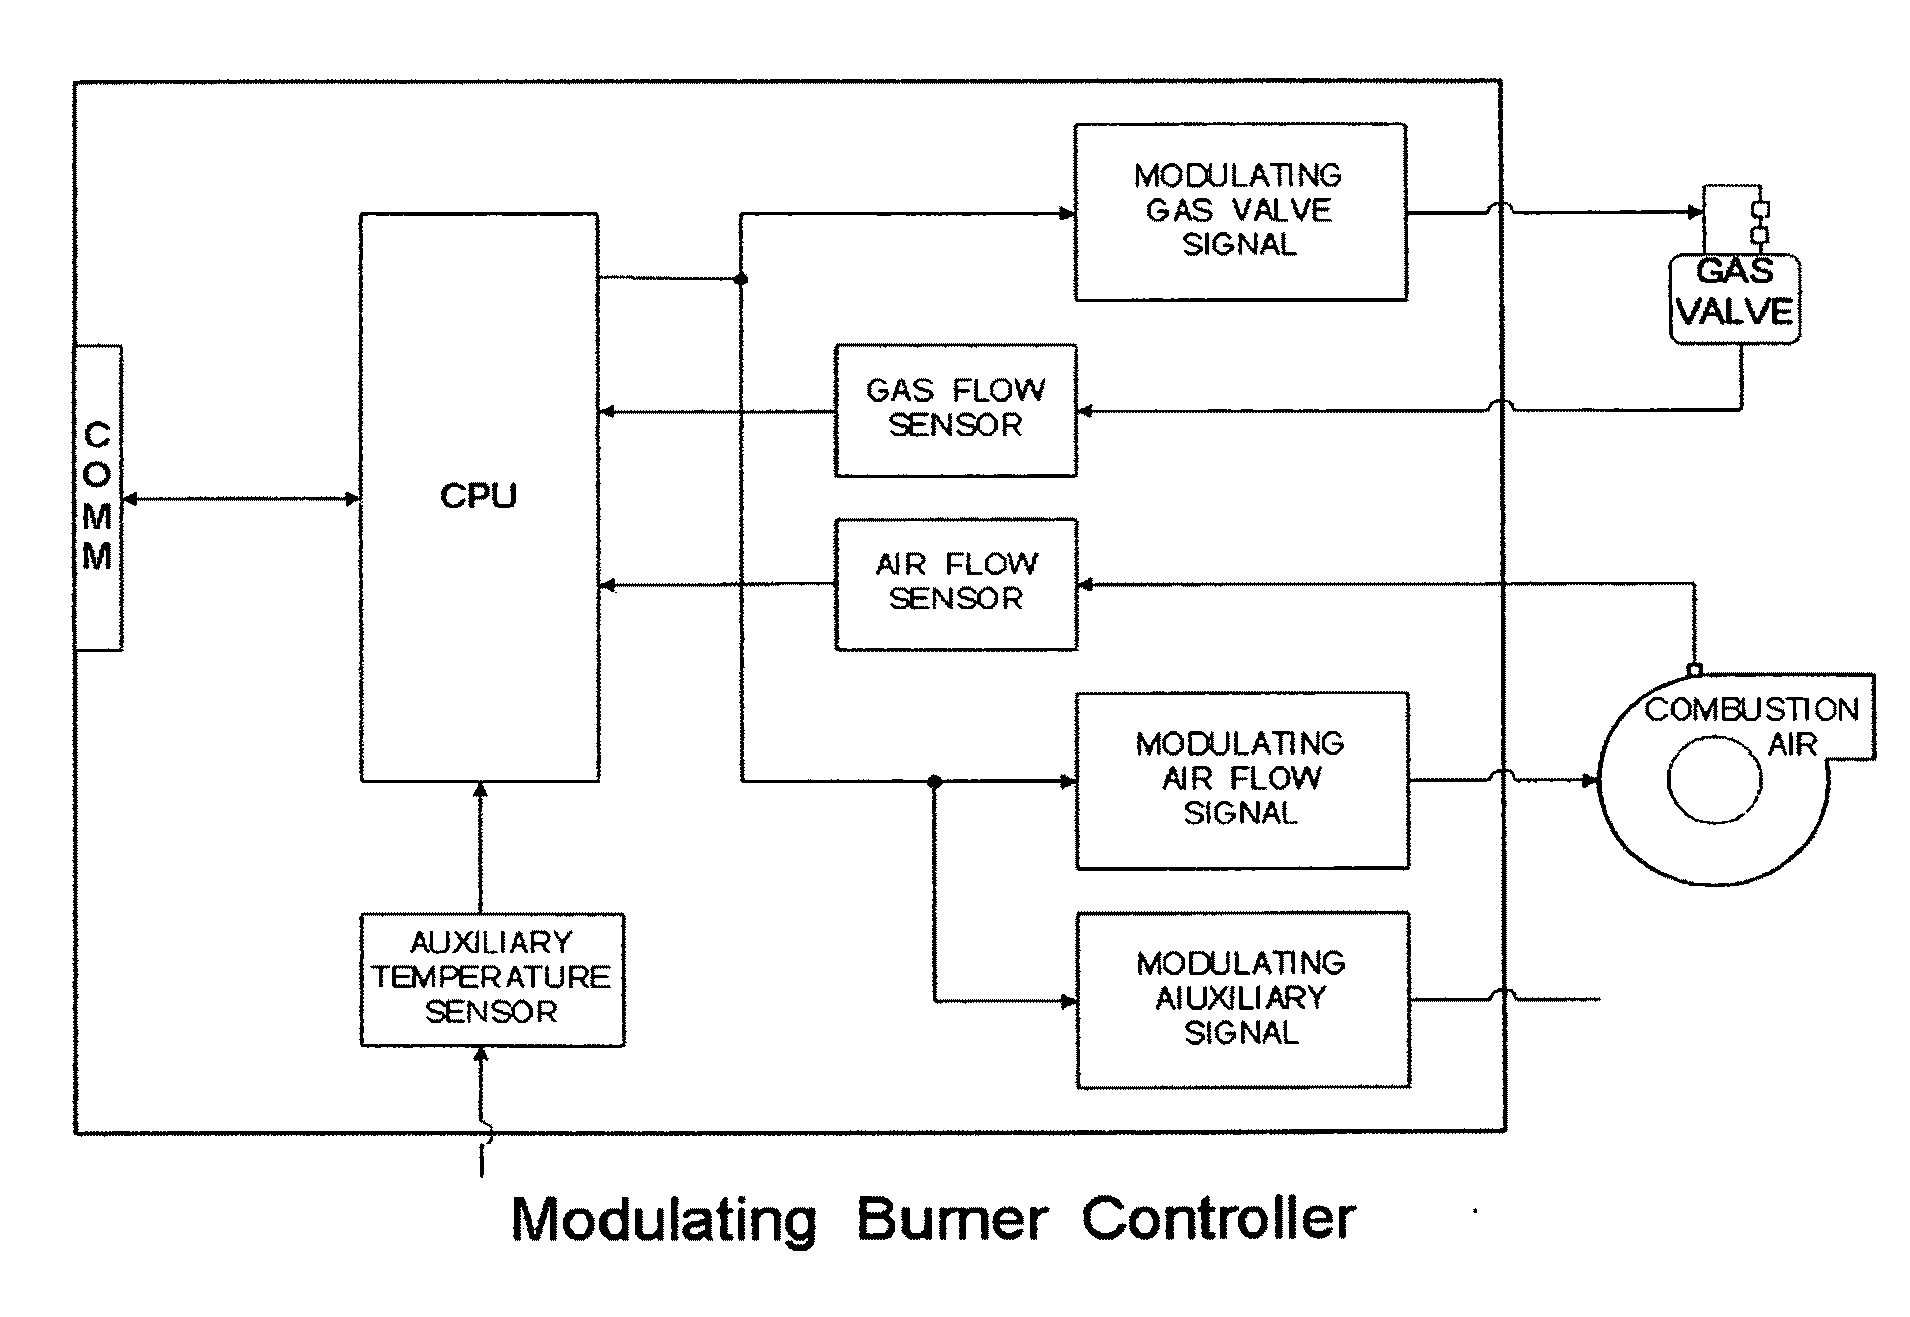 Apparatus and method for a modulating burner controller